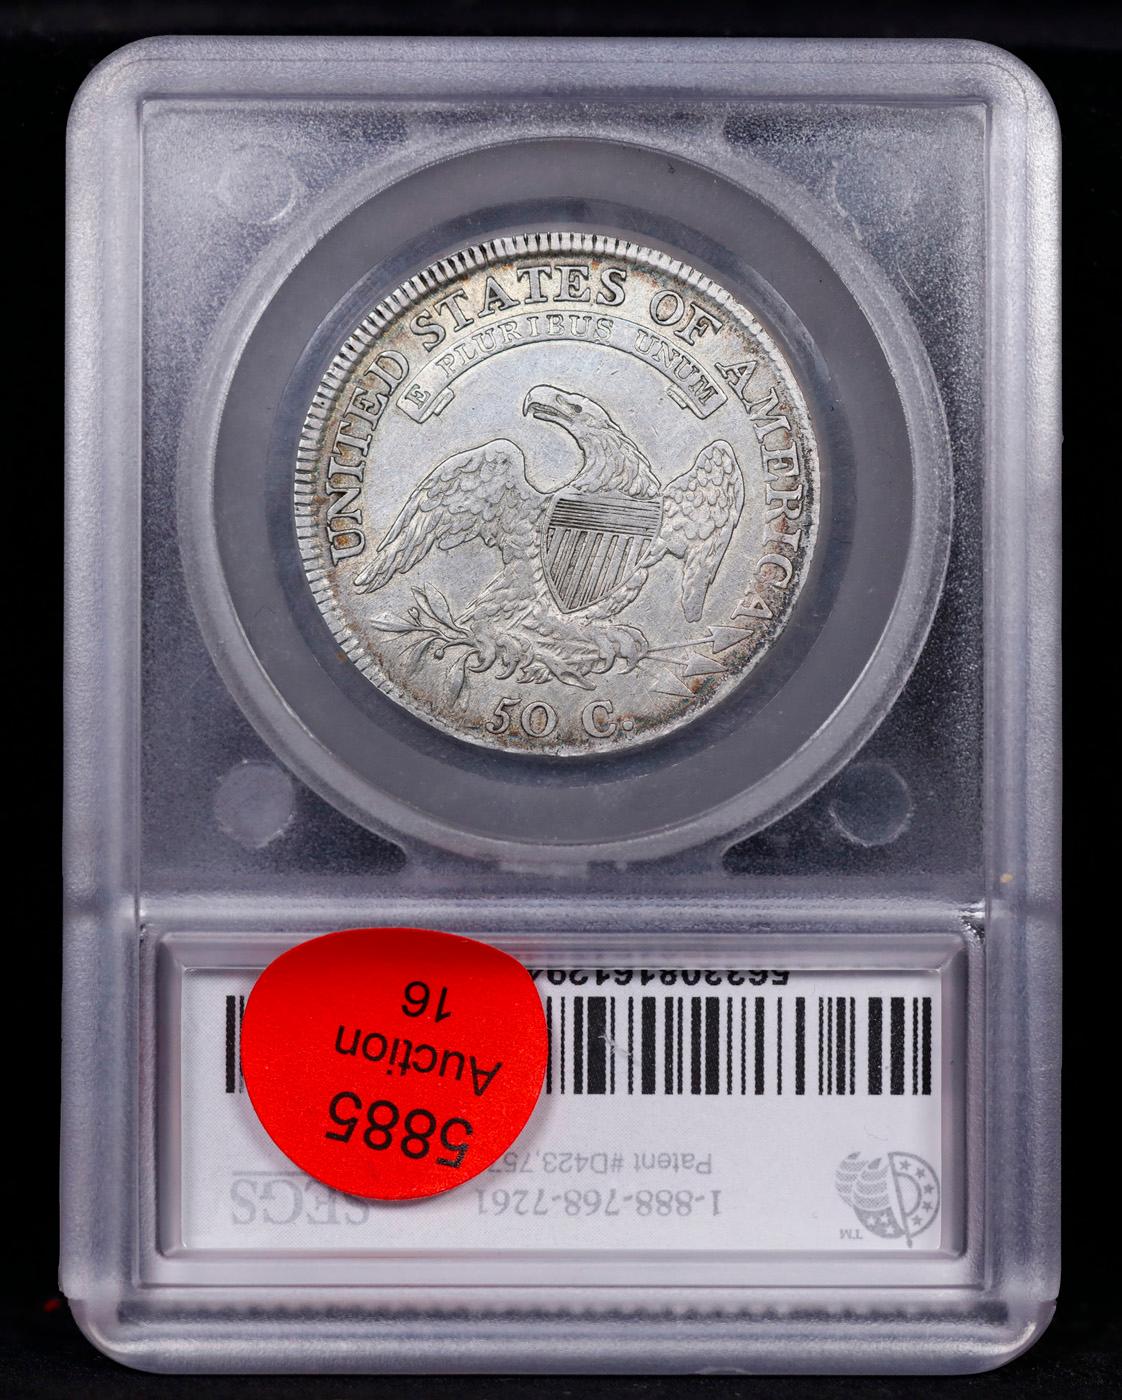 ***Auction Highlight*** 1810 Capped Bust Half Dollar 50c Graded au53 By SEGS (fc)